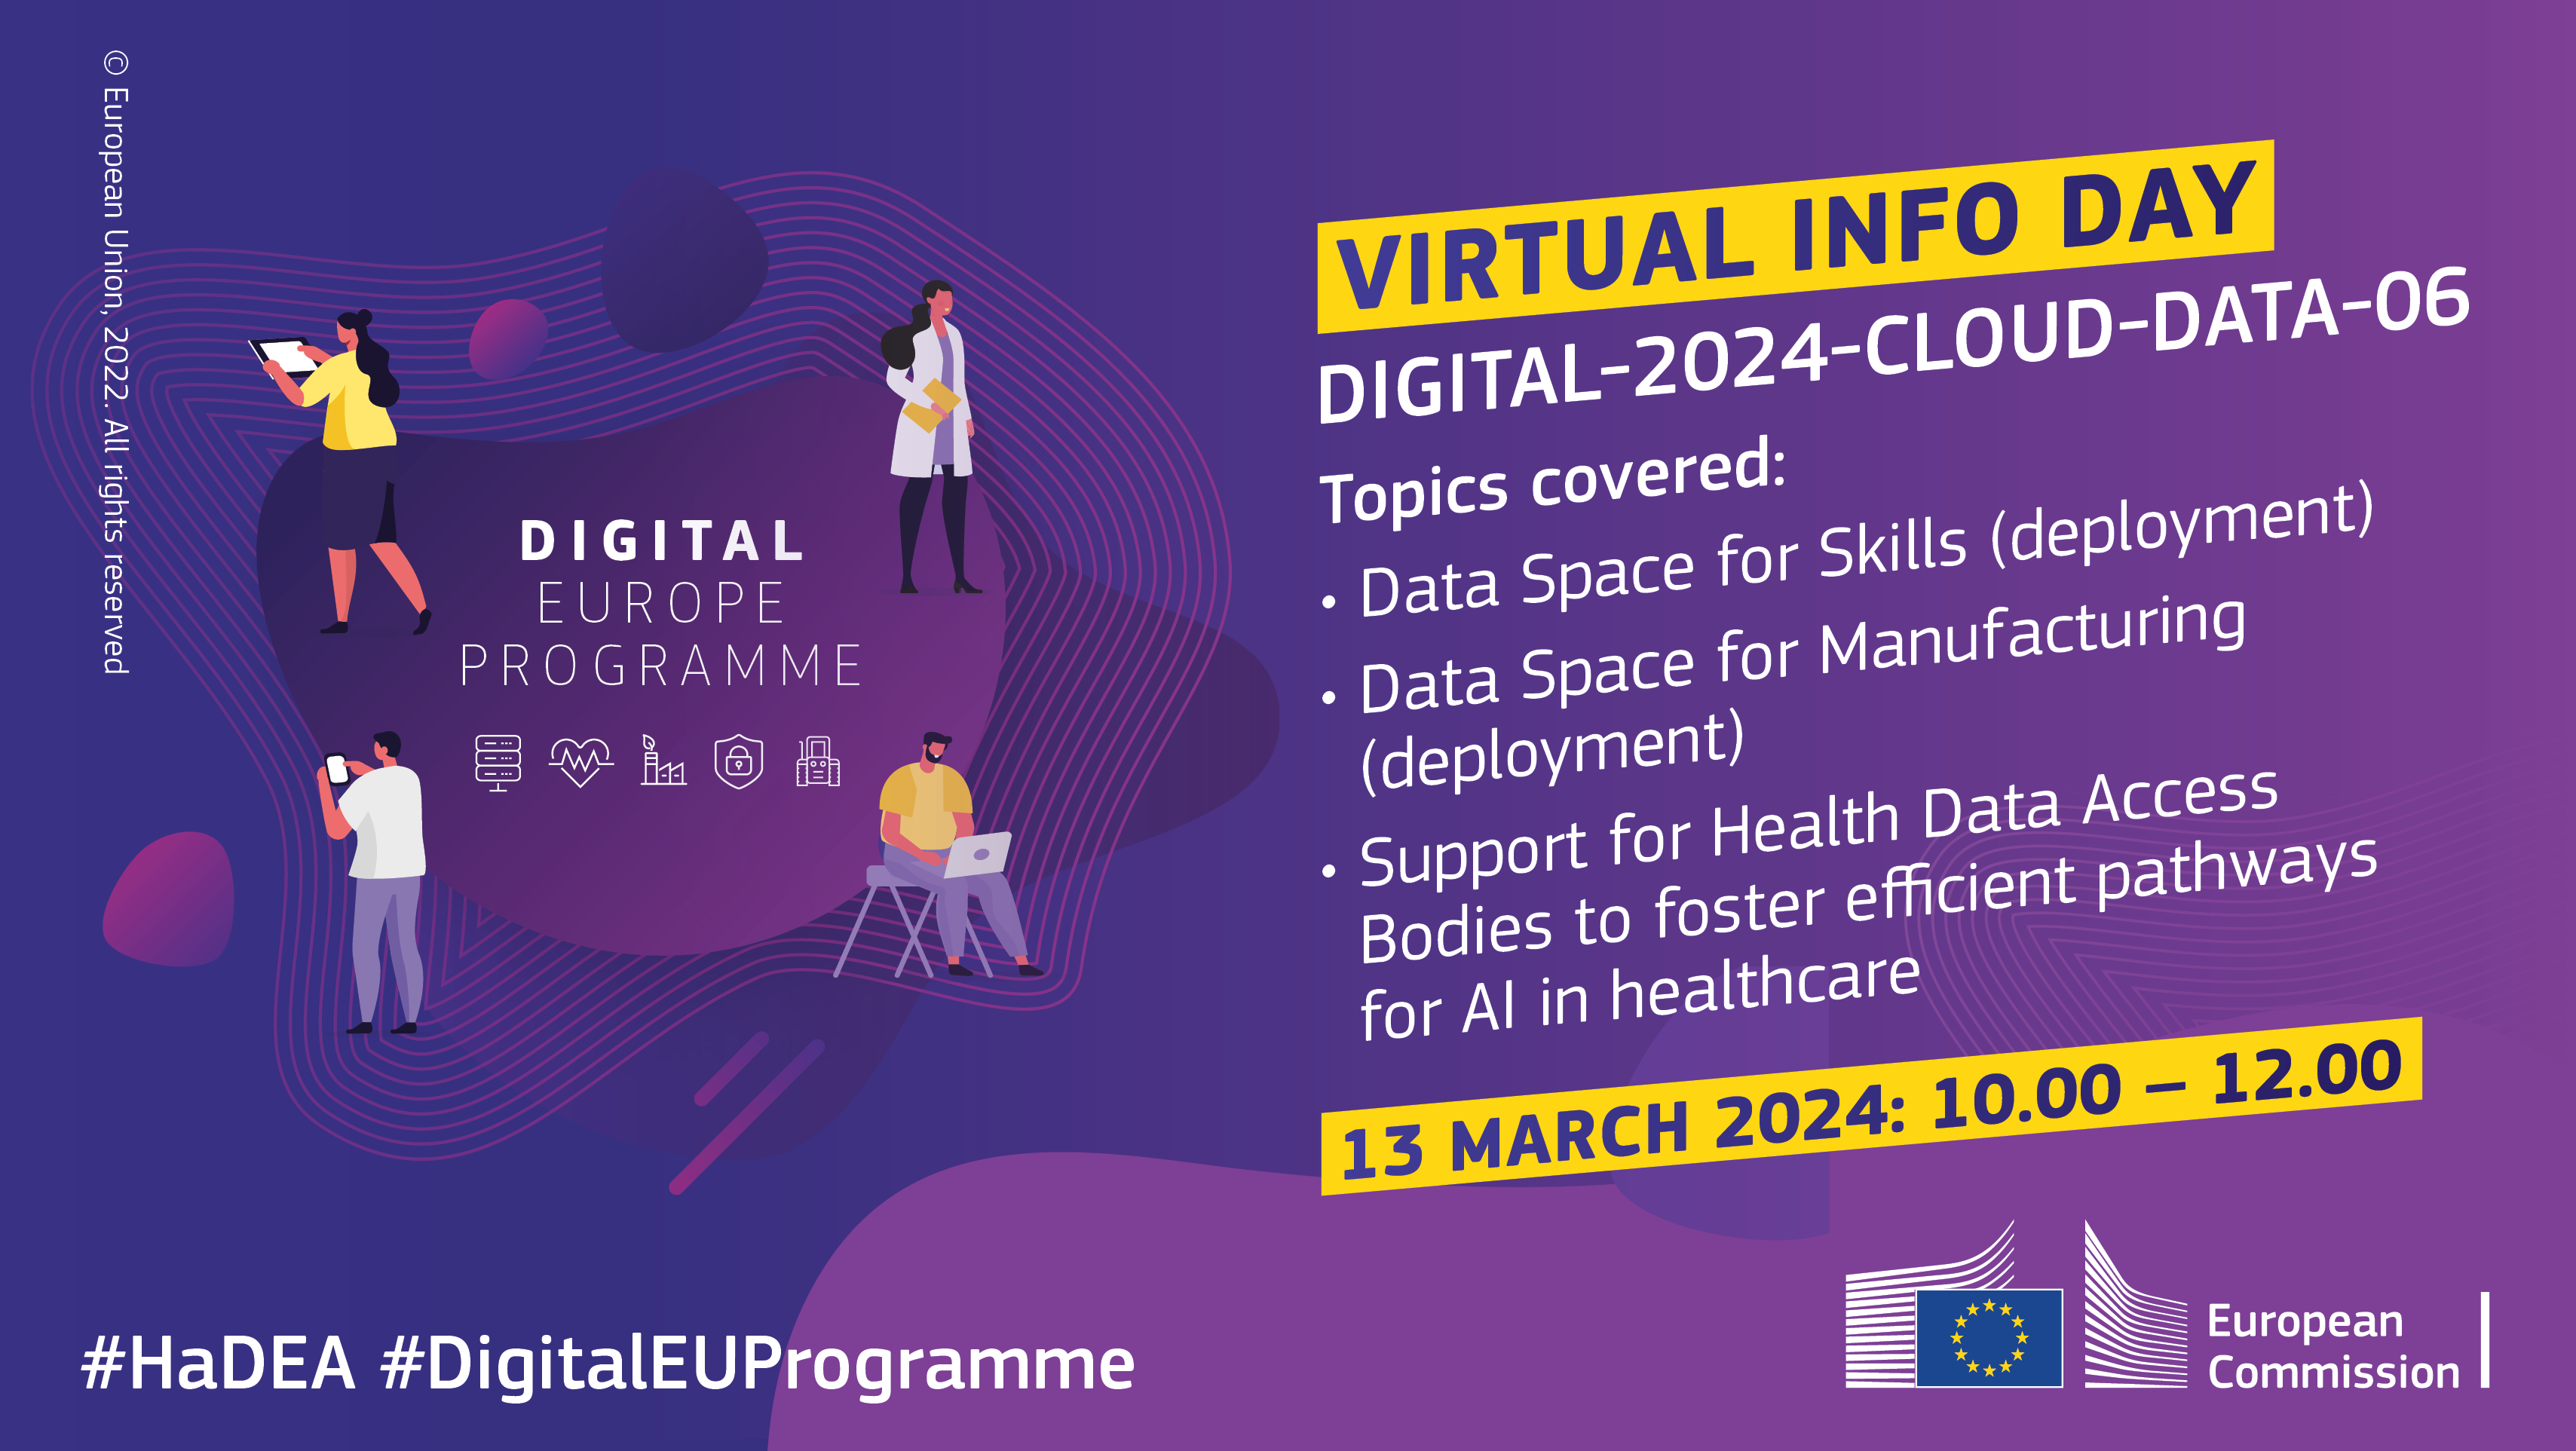 Purple background with visual identity of Digital Europe Programme. Virtual Info Day on 13 March.